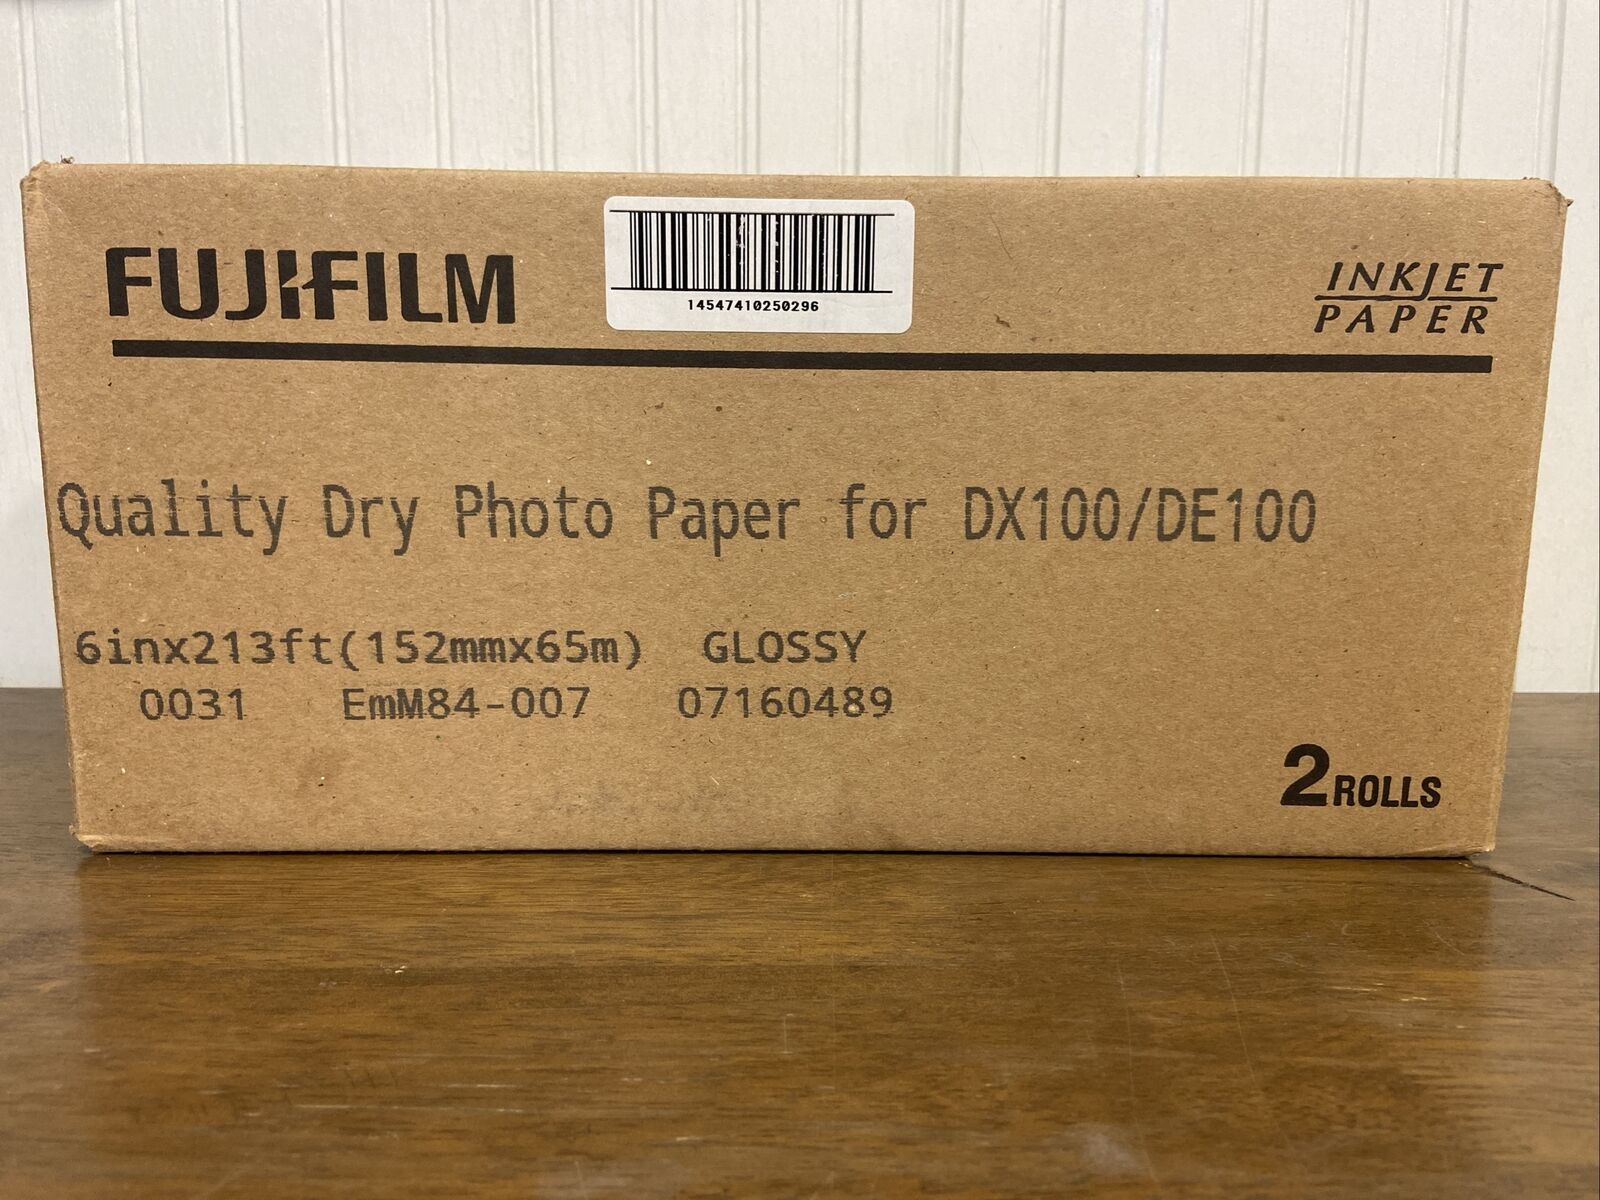 Fujifilm Quality Dry Photo Paper For DX100/DE100 6inx213ft Glossy 07160489